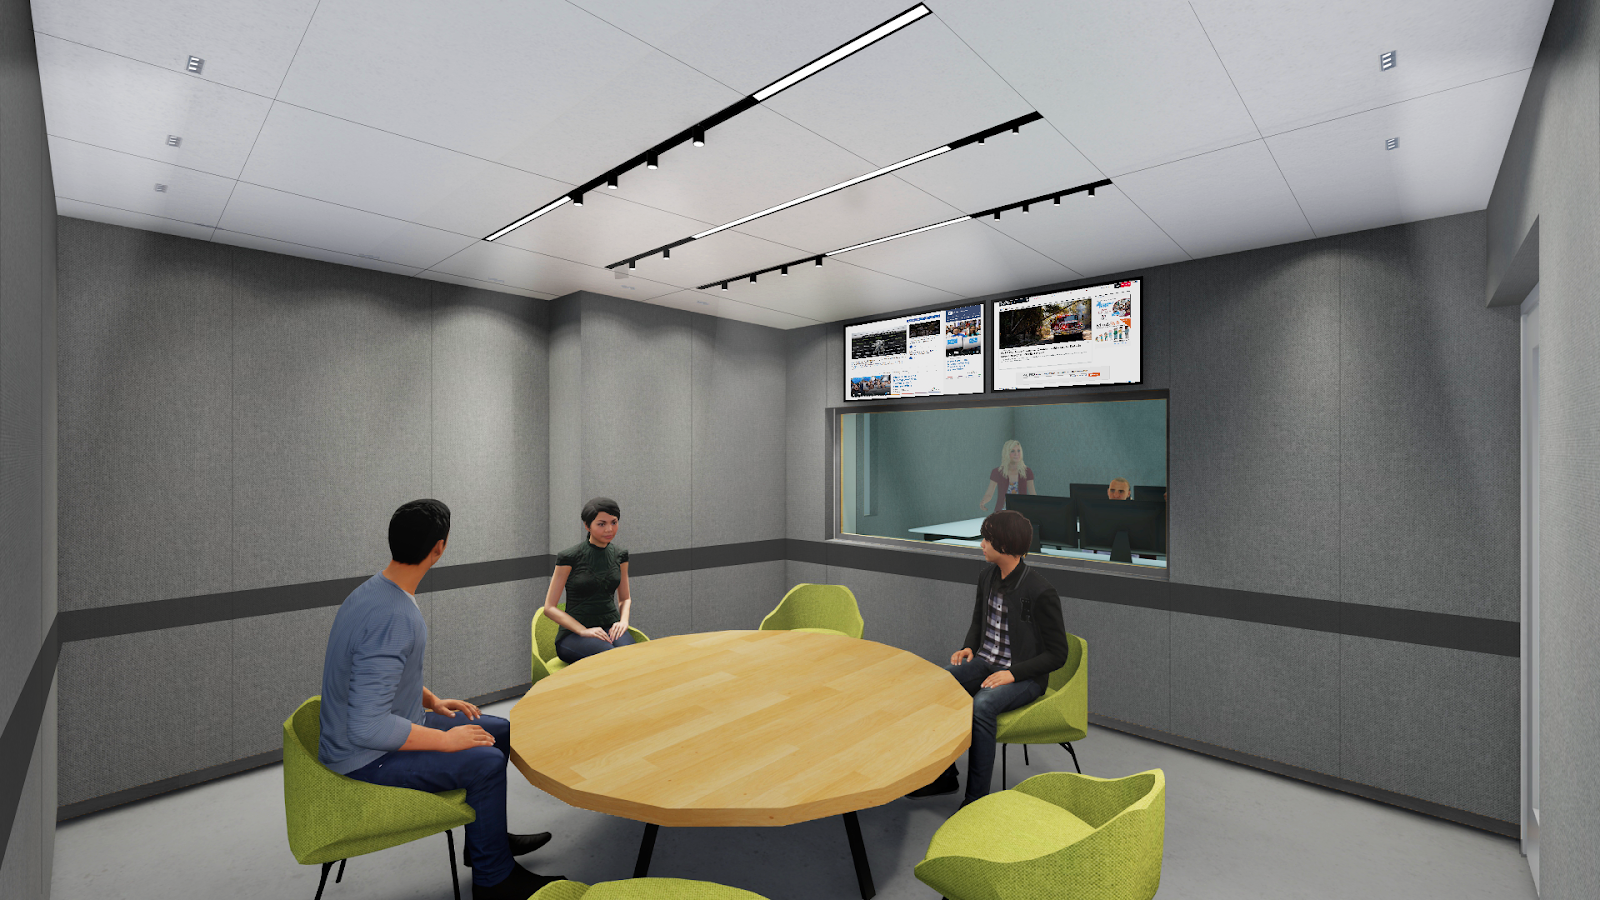 Digital rendering featuring several people sitting around a round wooden table. One person looks over shoulder into glass window where two more people sit behind computers.